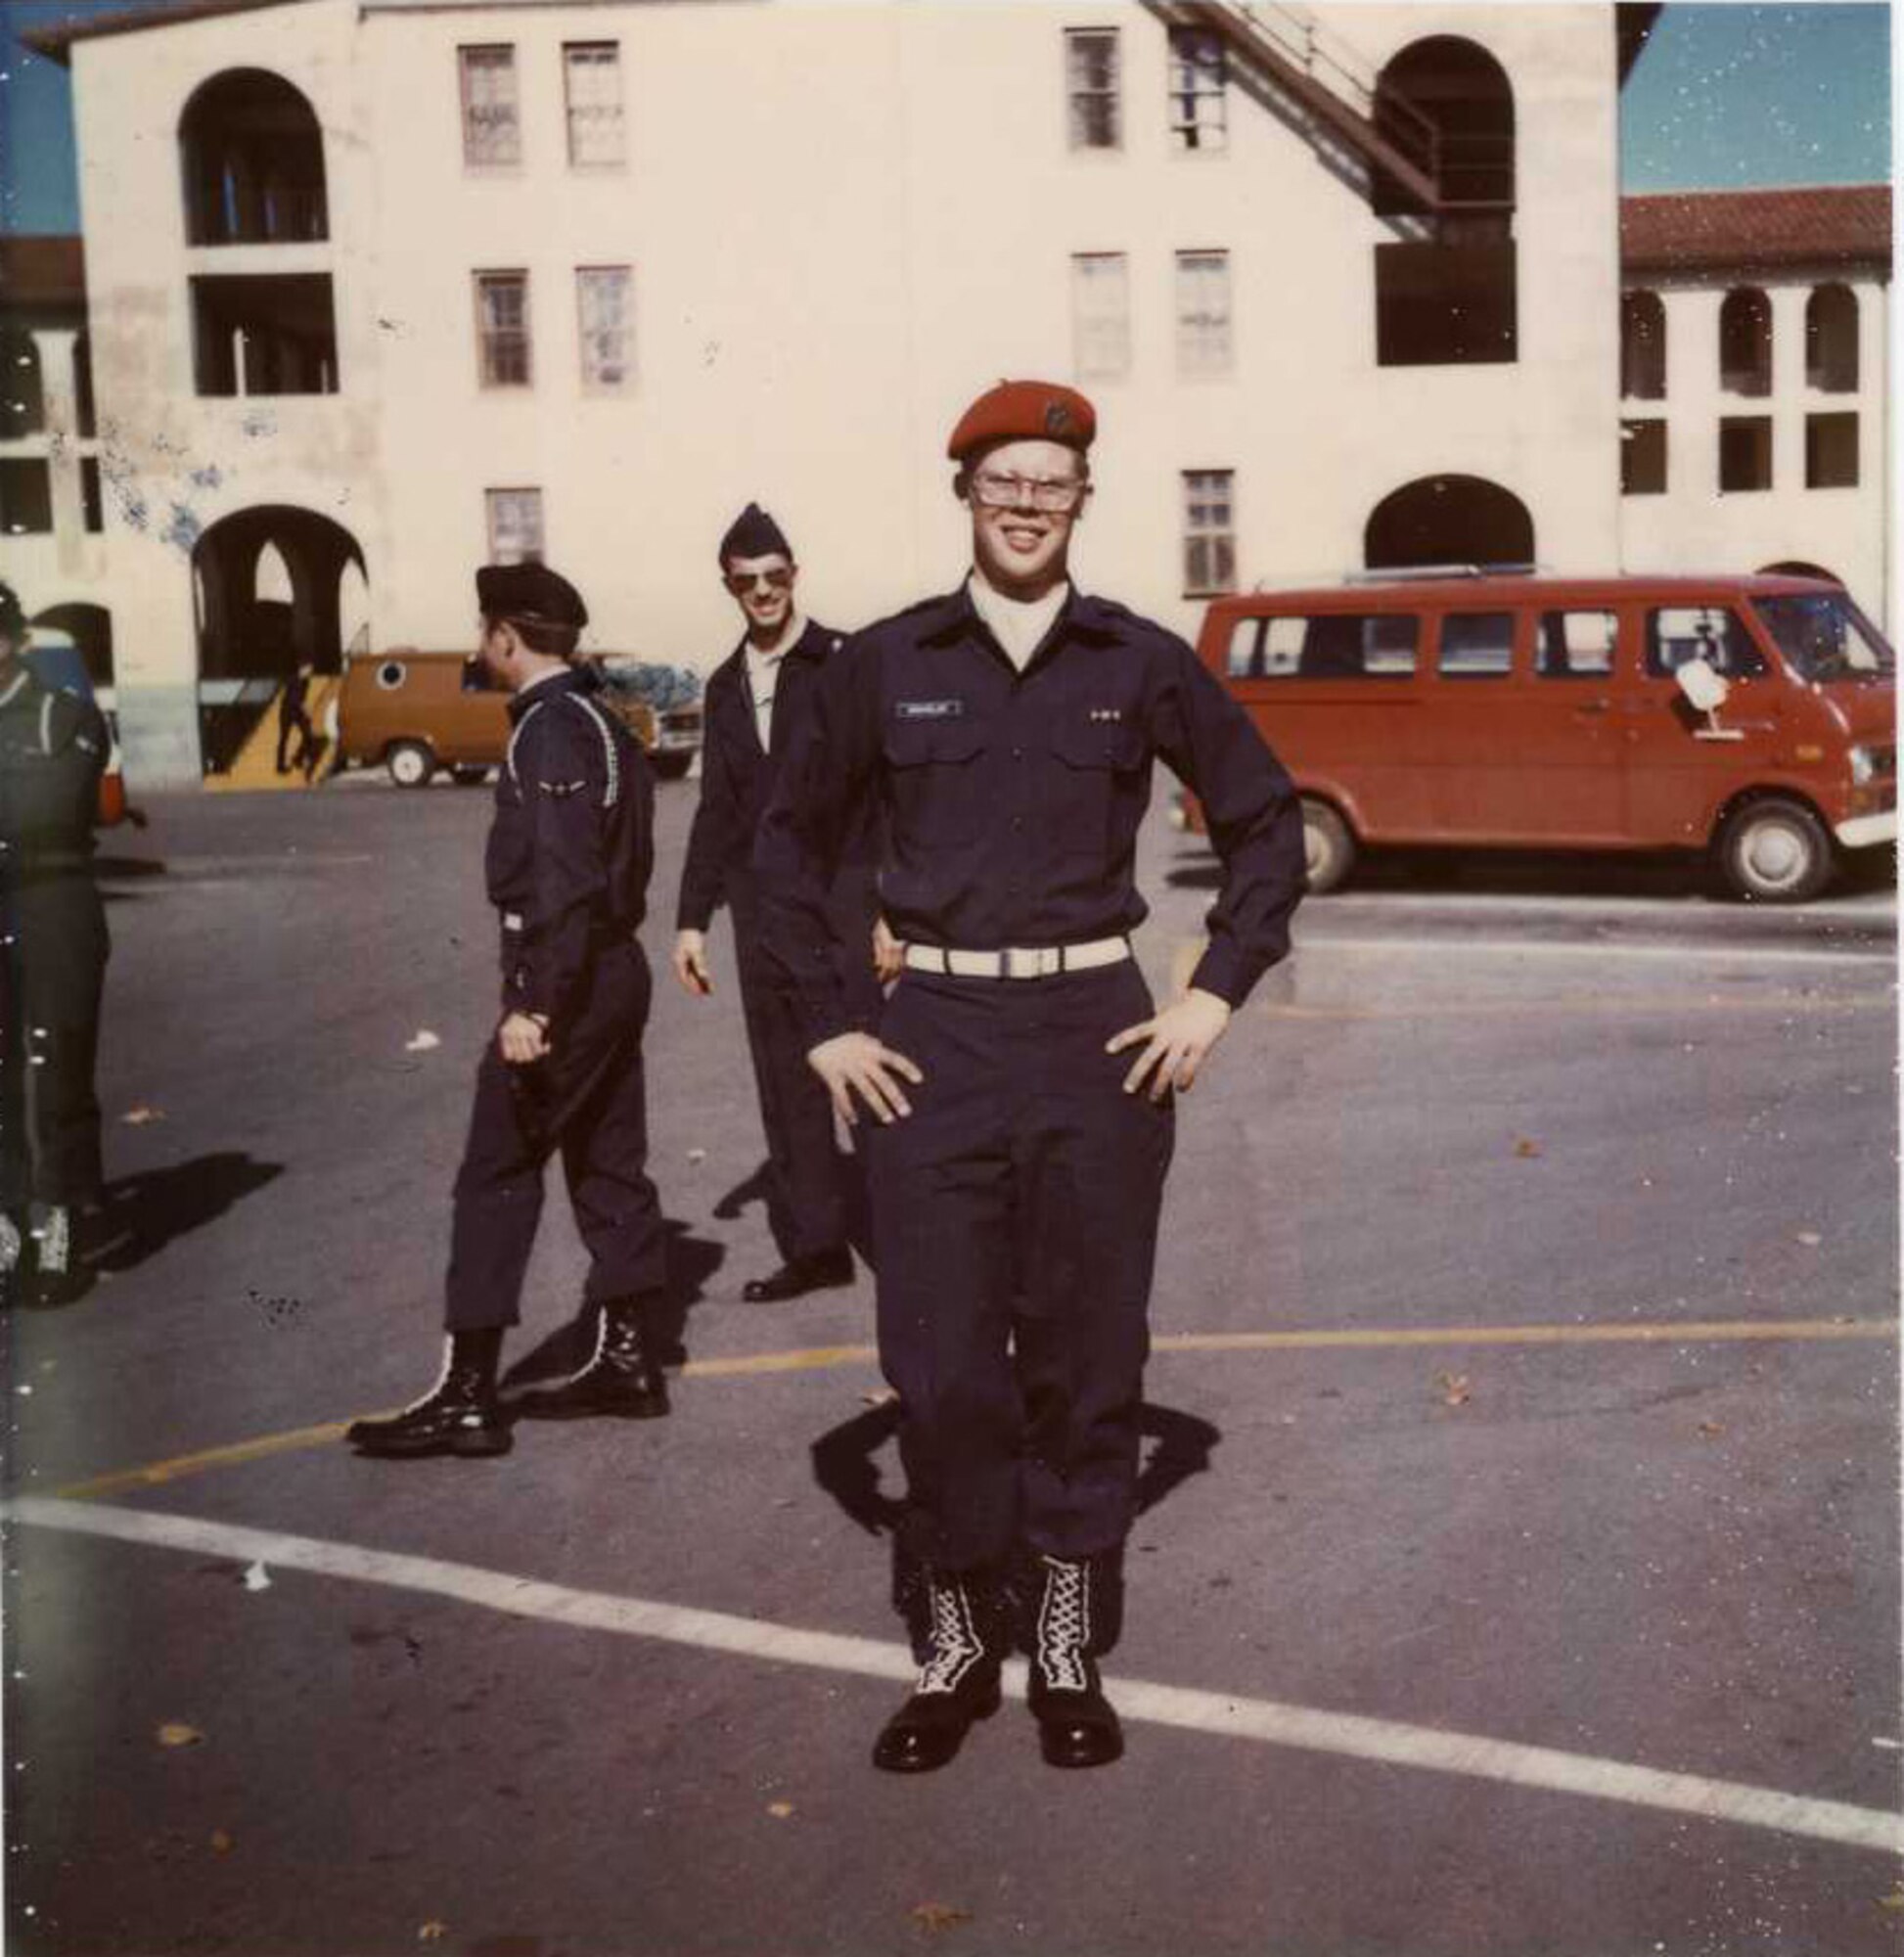 A member of the "Red Dragon" drum and bugle corp, then-Airman Schueler performed instruments for base and local events for the Air Force. In this photo dated Nov. 15, 1975 at Fort Sill, Okla., the chief is wearing the Air Force's now-retired blue utility uniform. (Courtesy photo)